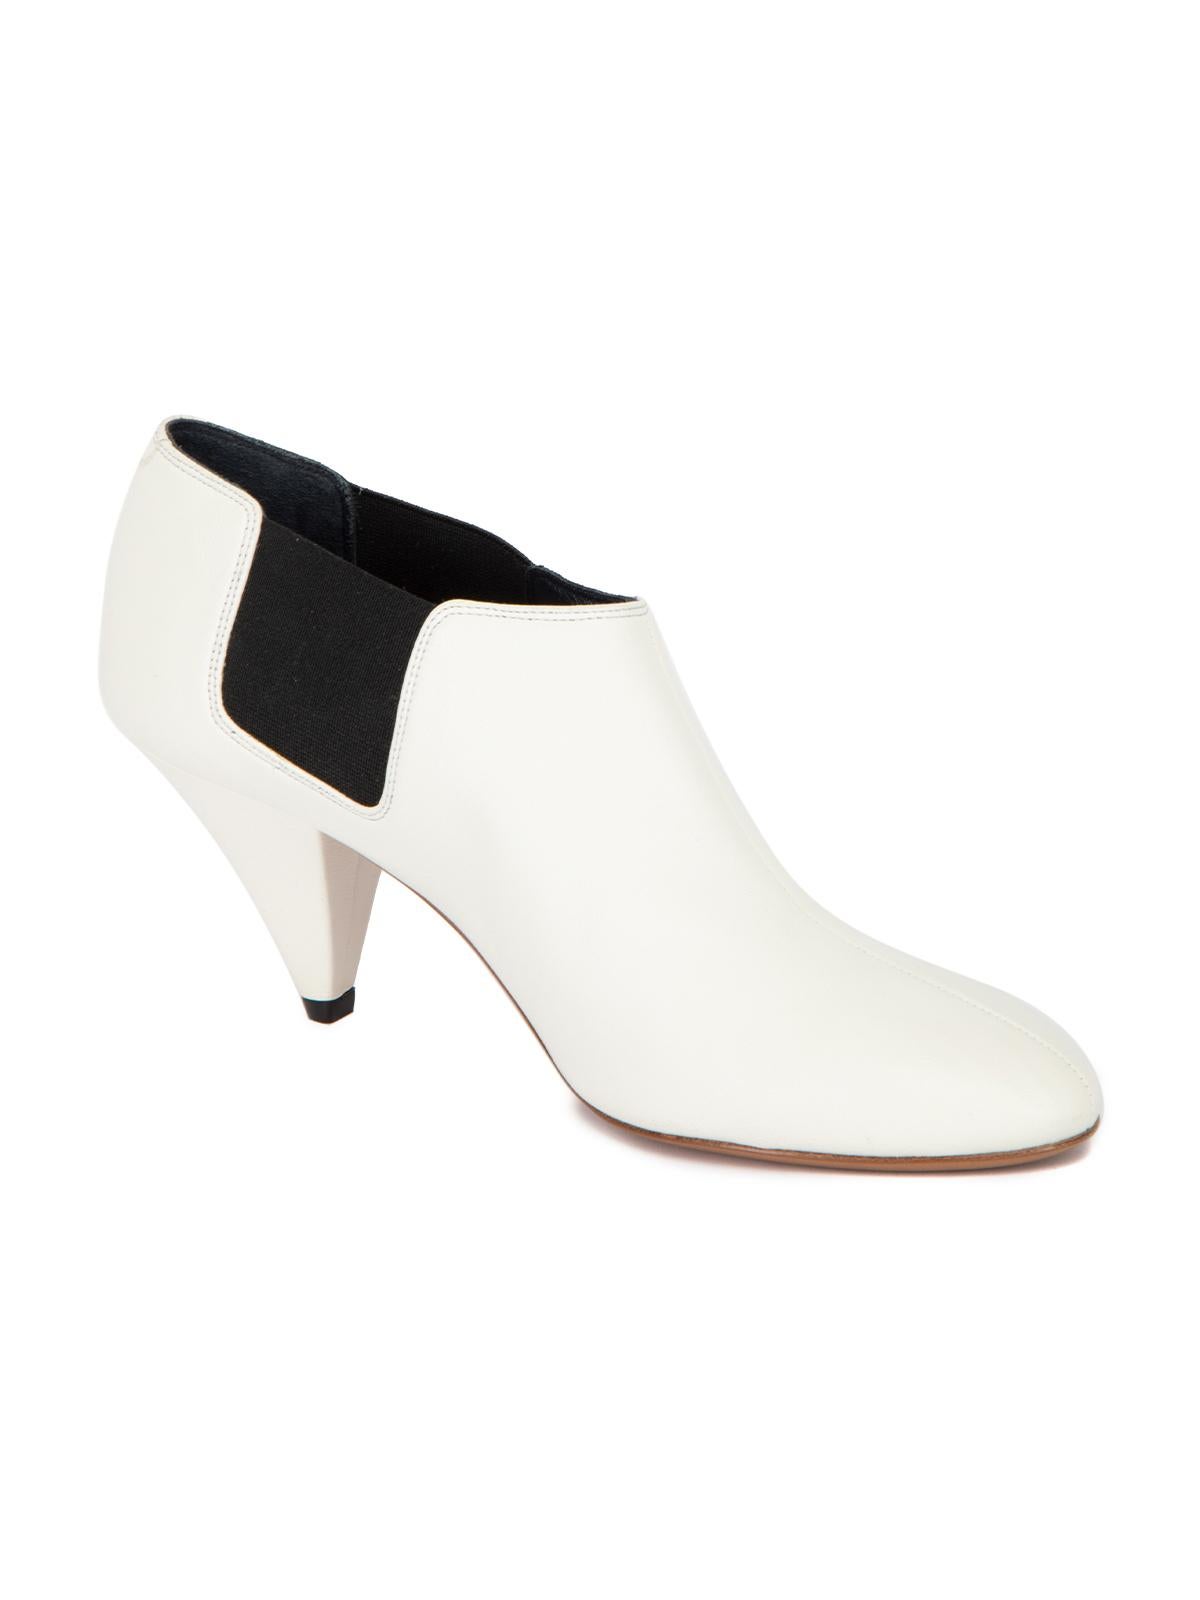 CONDITION is Very good. Hardly any visible wear to boots is evident apart from some very light creasing on this used Céline designer resale item.  Details  White Leather Mid heel Elasticated sides Almond toe Leather insole        Made in Italy  